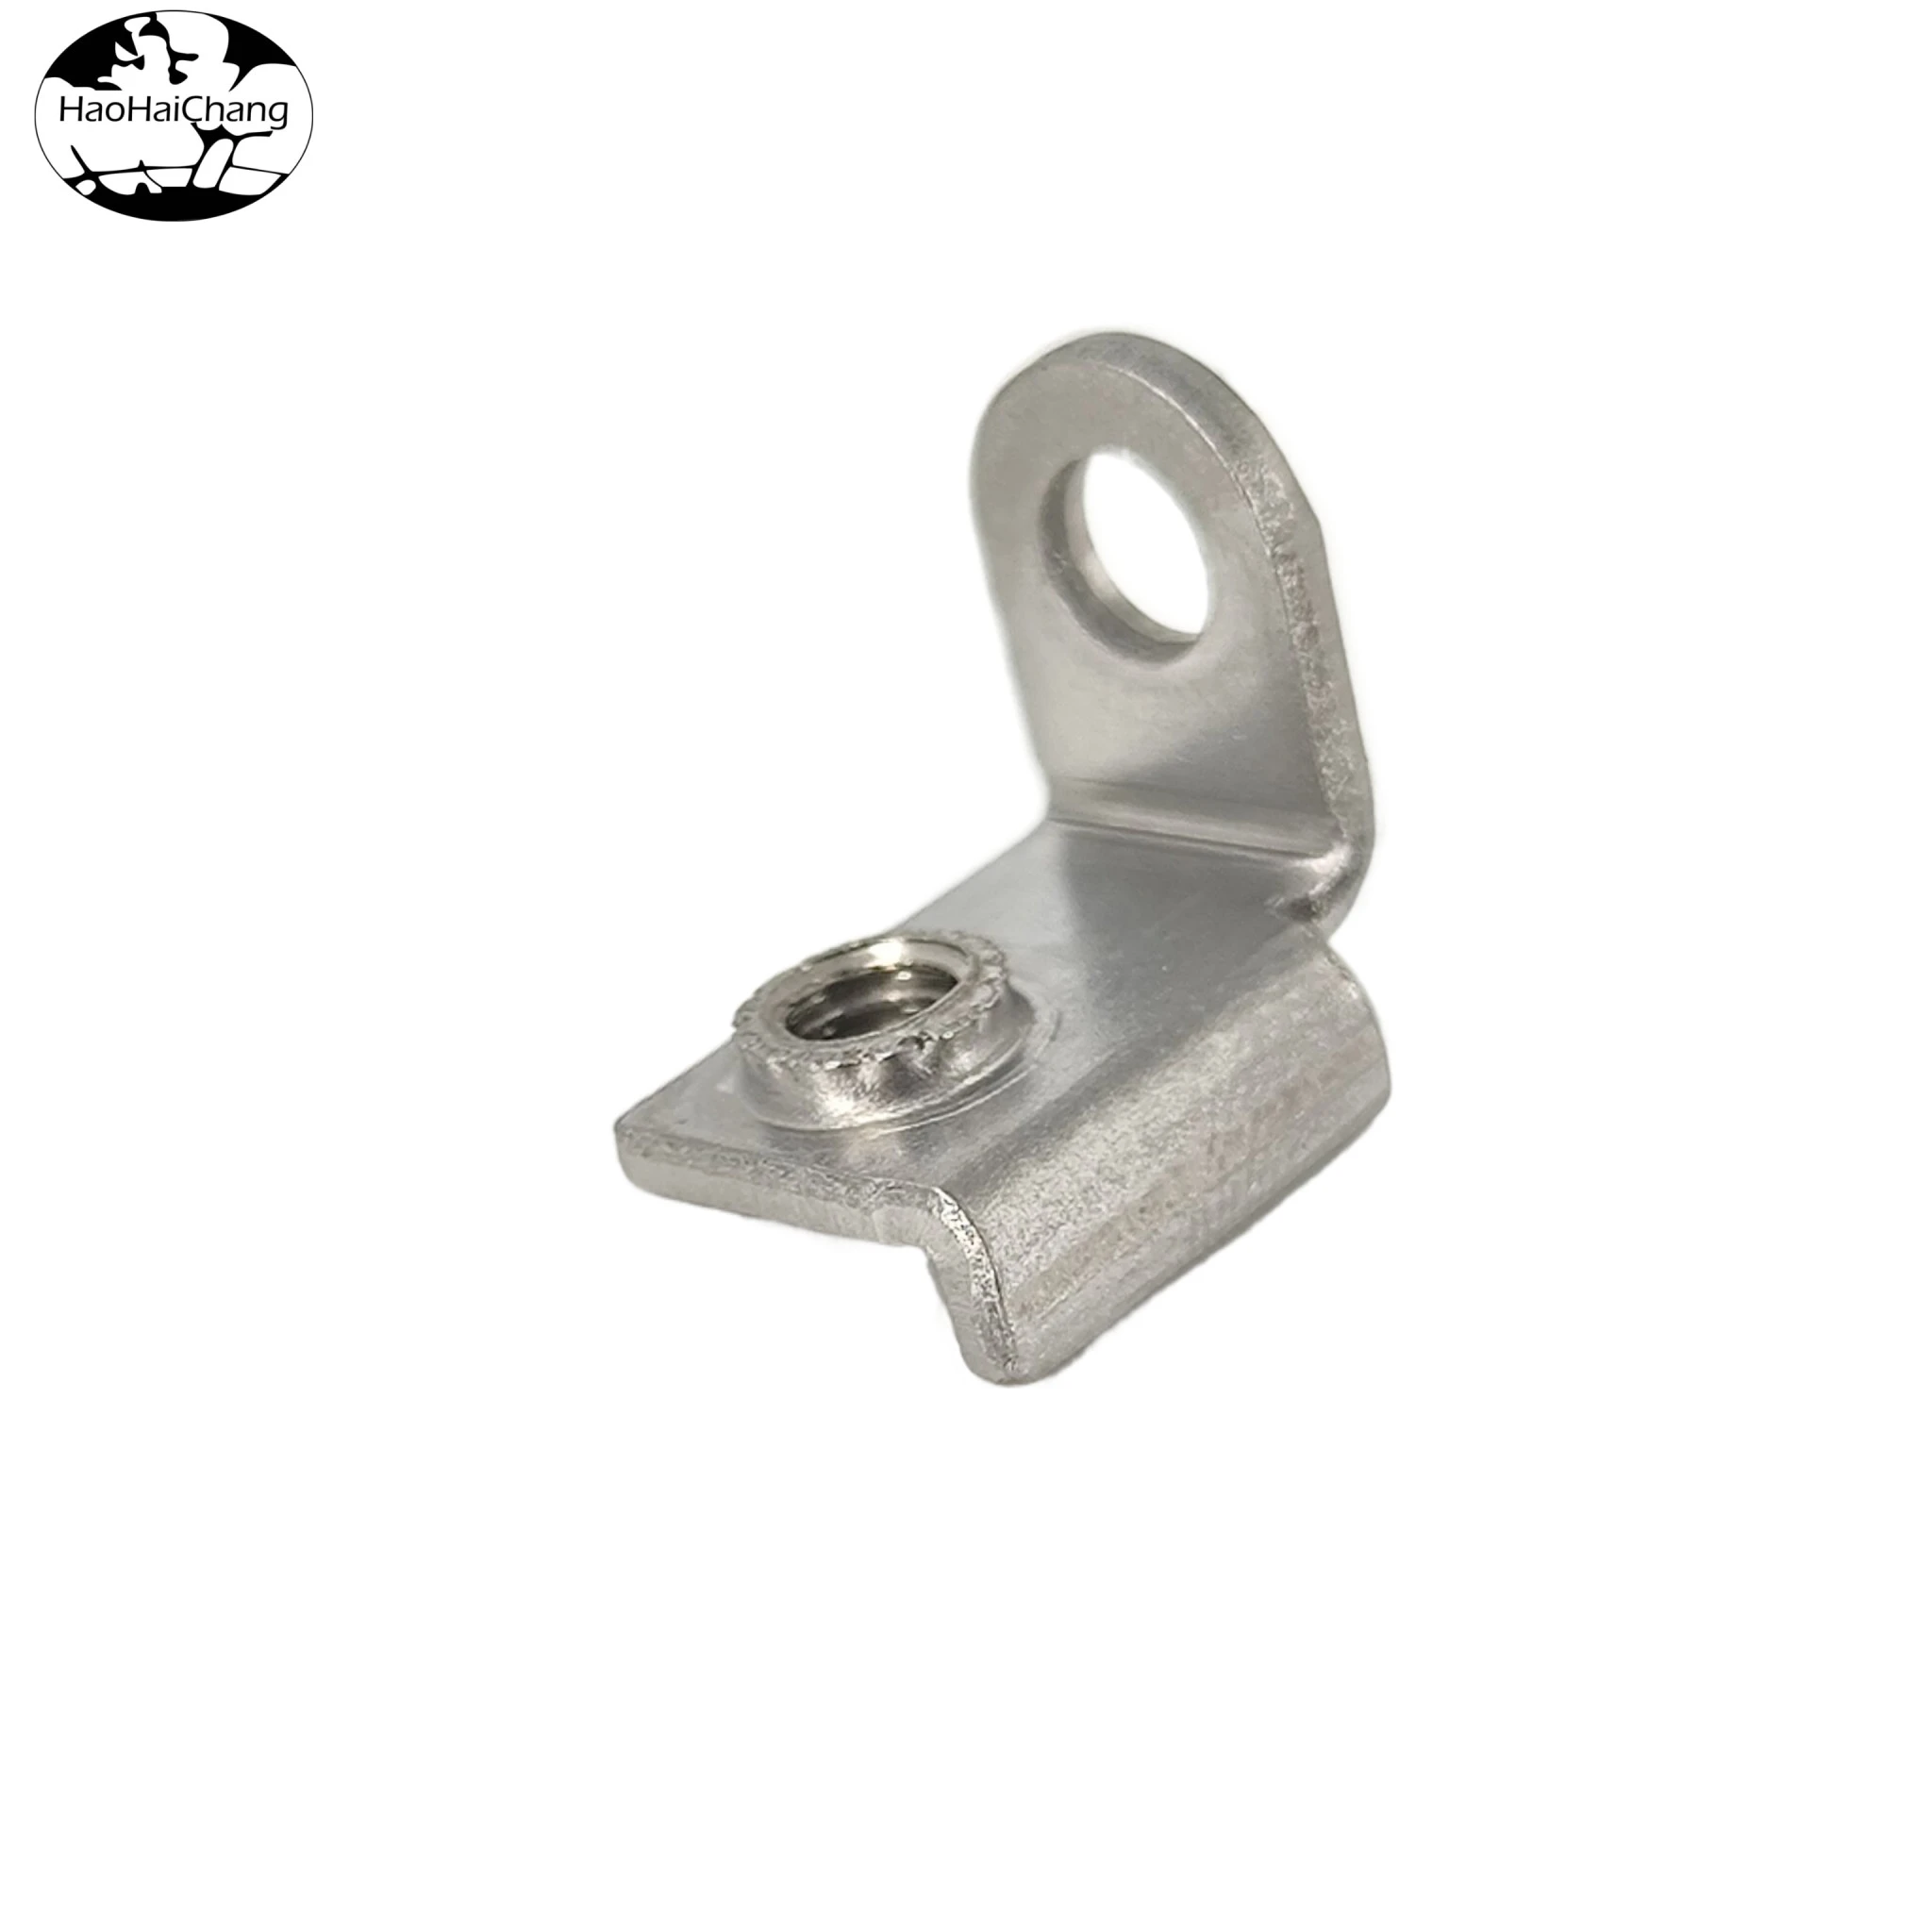 HHC-0342 Connector